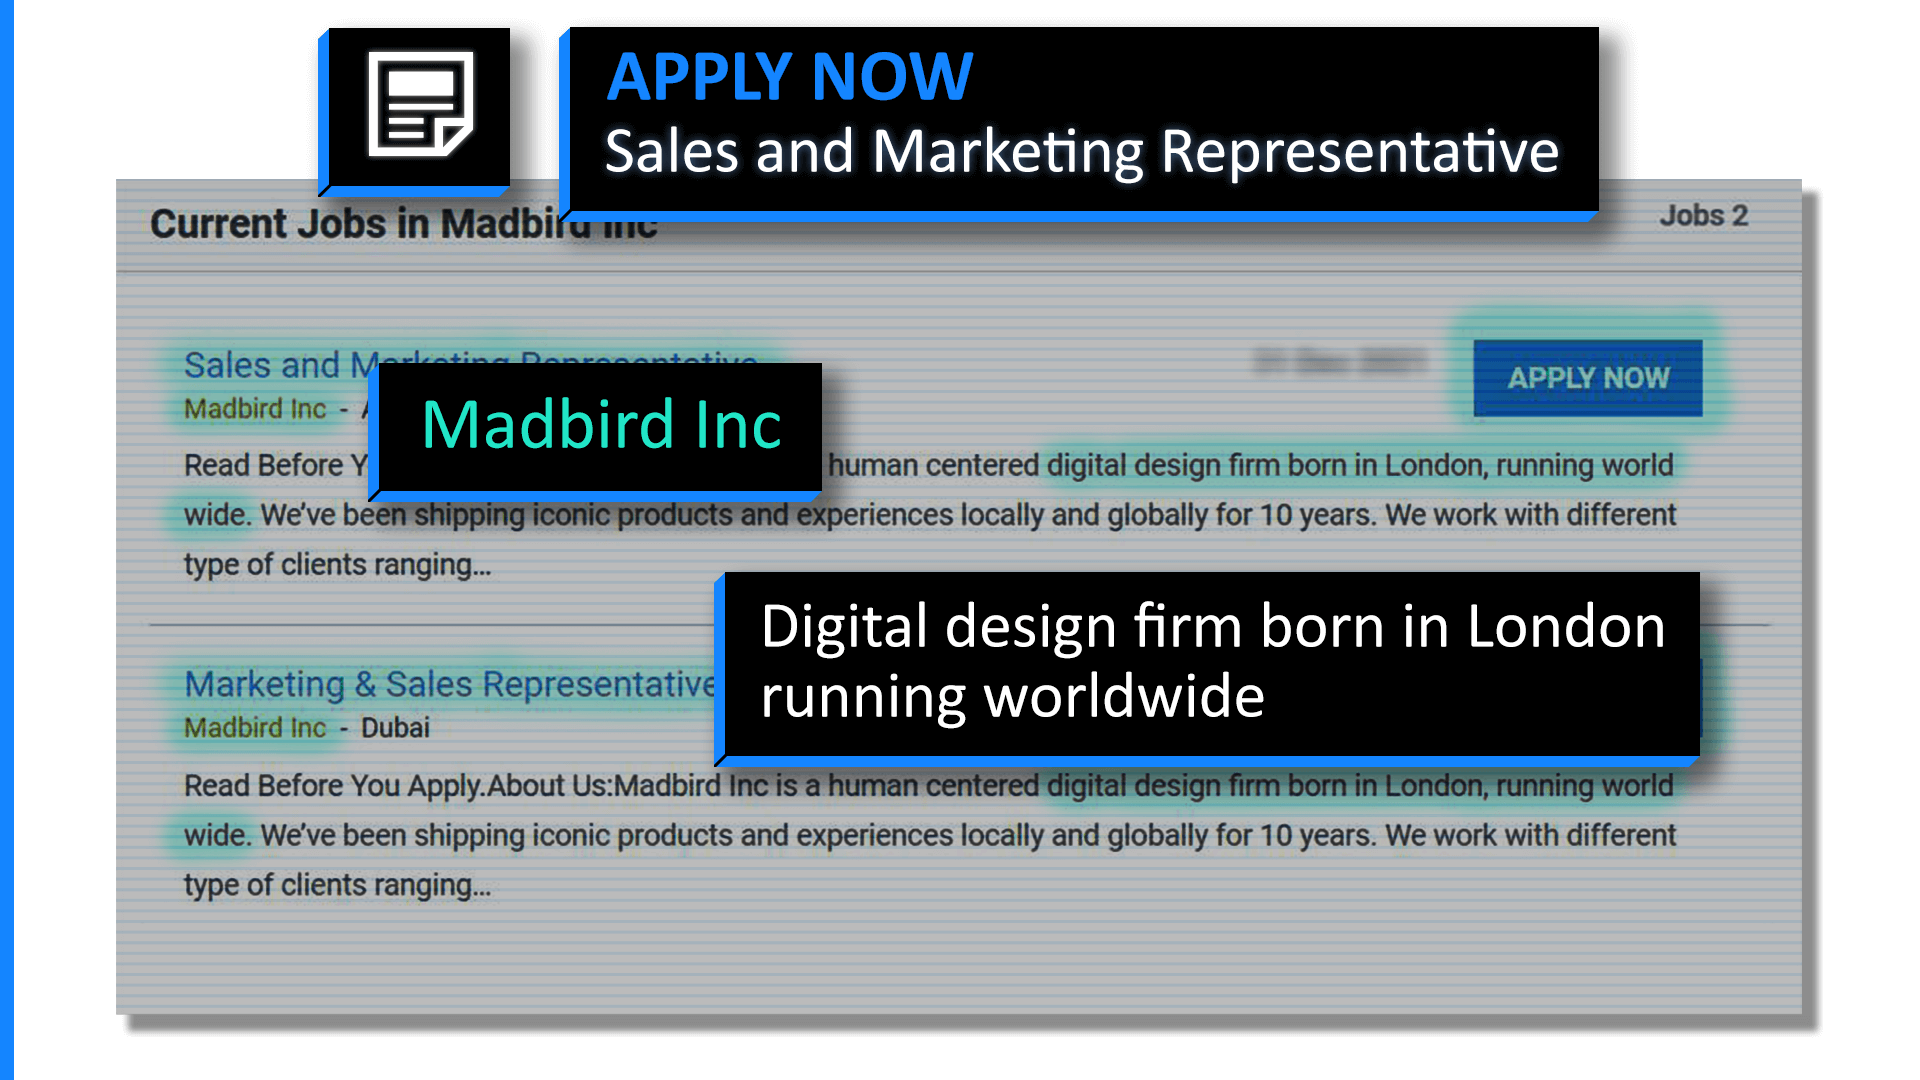 Job adverts were placed for Madbird teams in London and Dubai